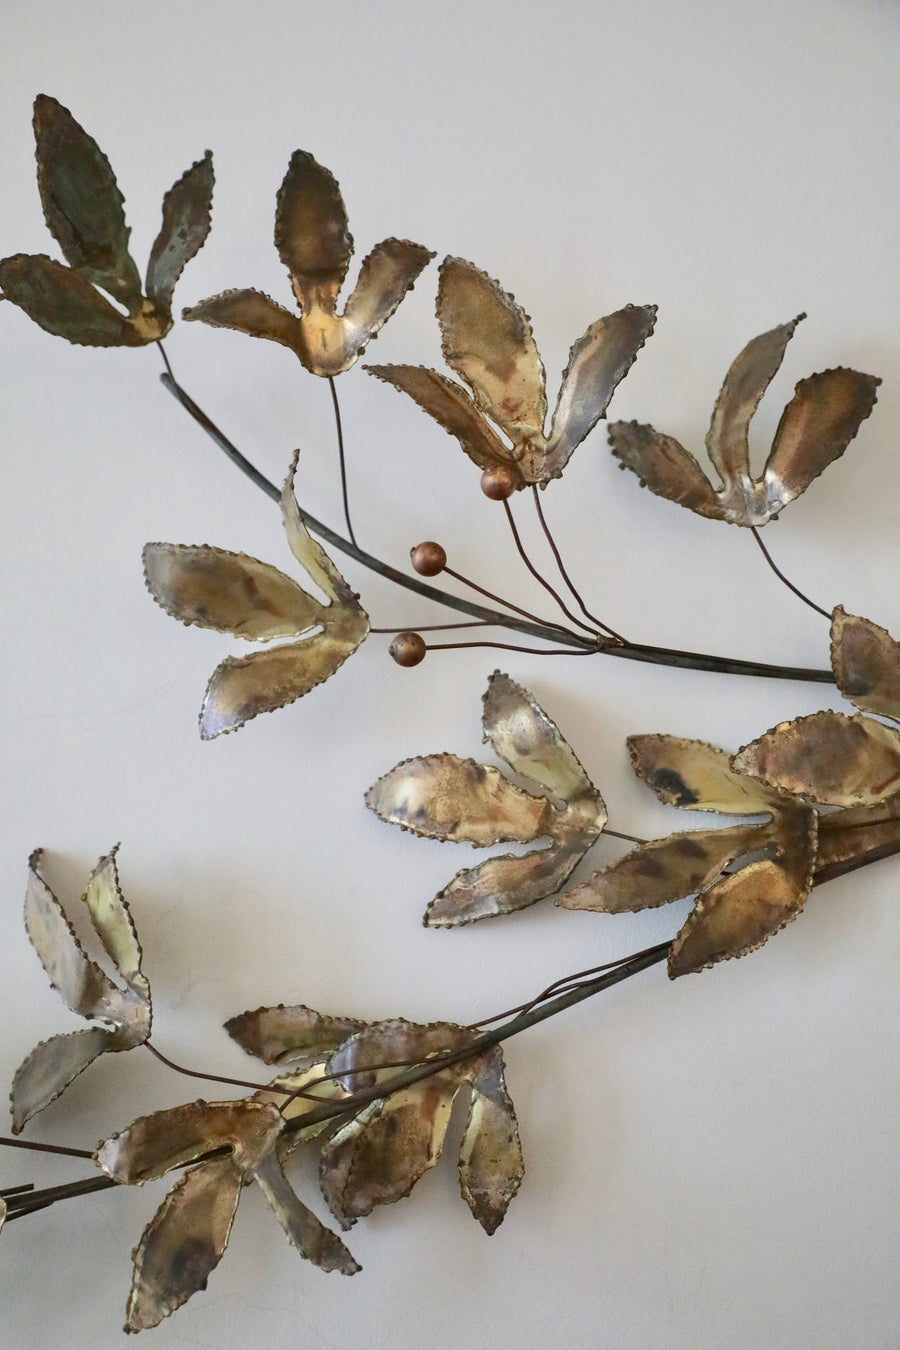 C. Jeré Metal Wall Sculpture of Stylized Branches and Leaves (1969)